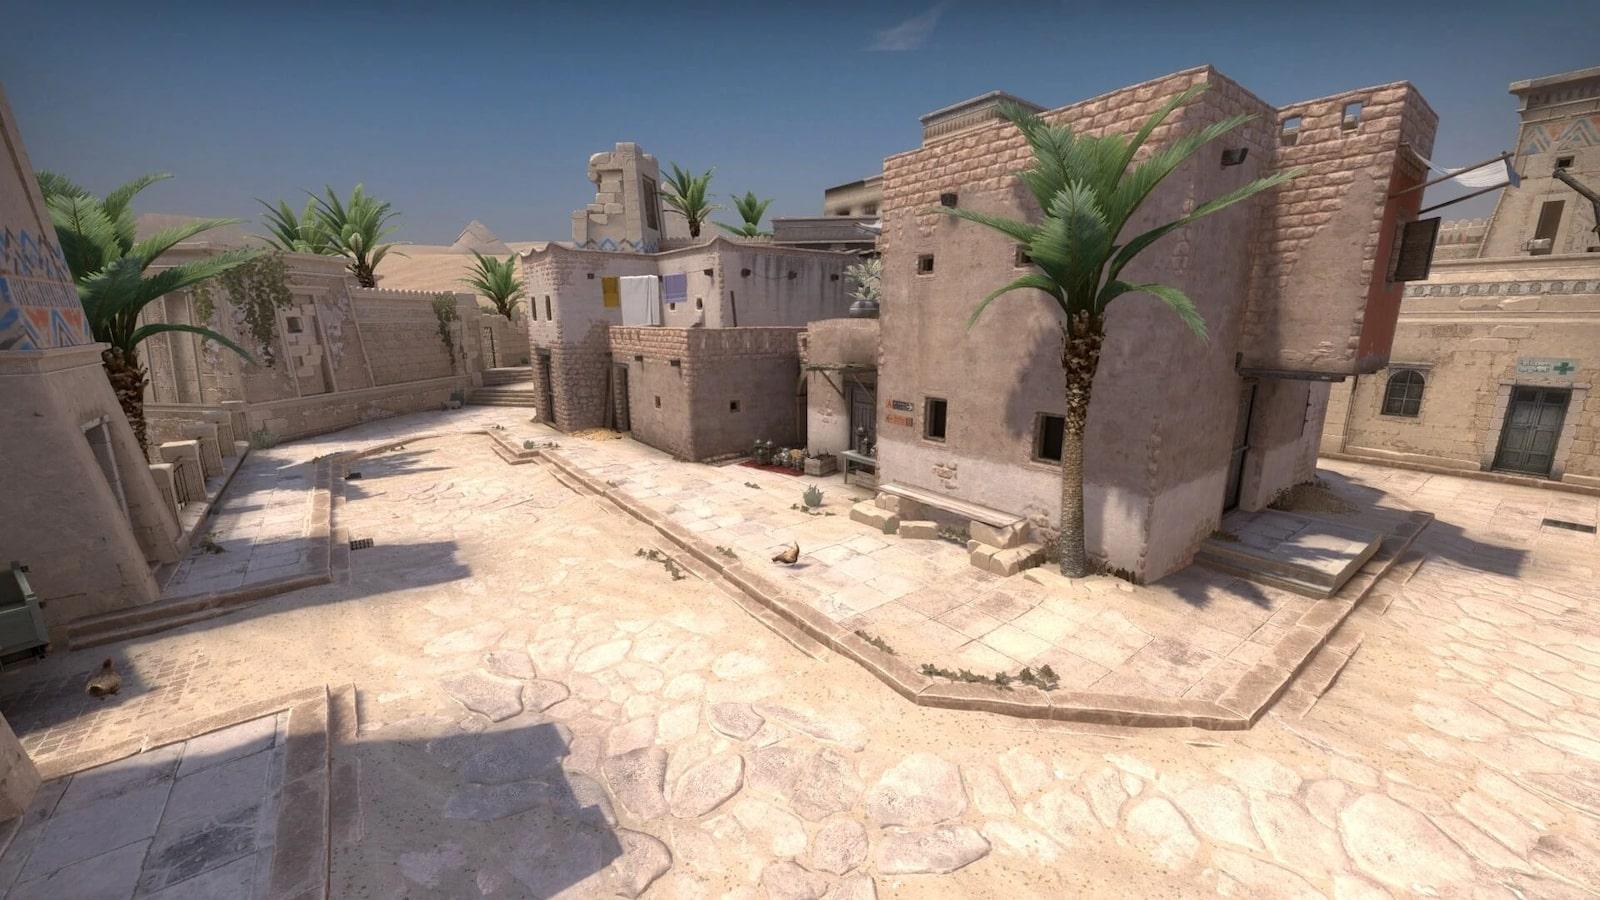 CS:GO map Anubis which will replace Dust2